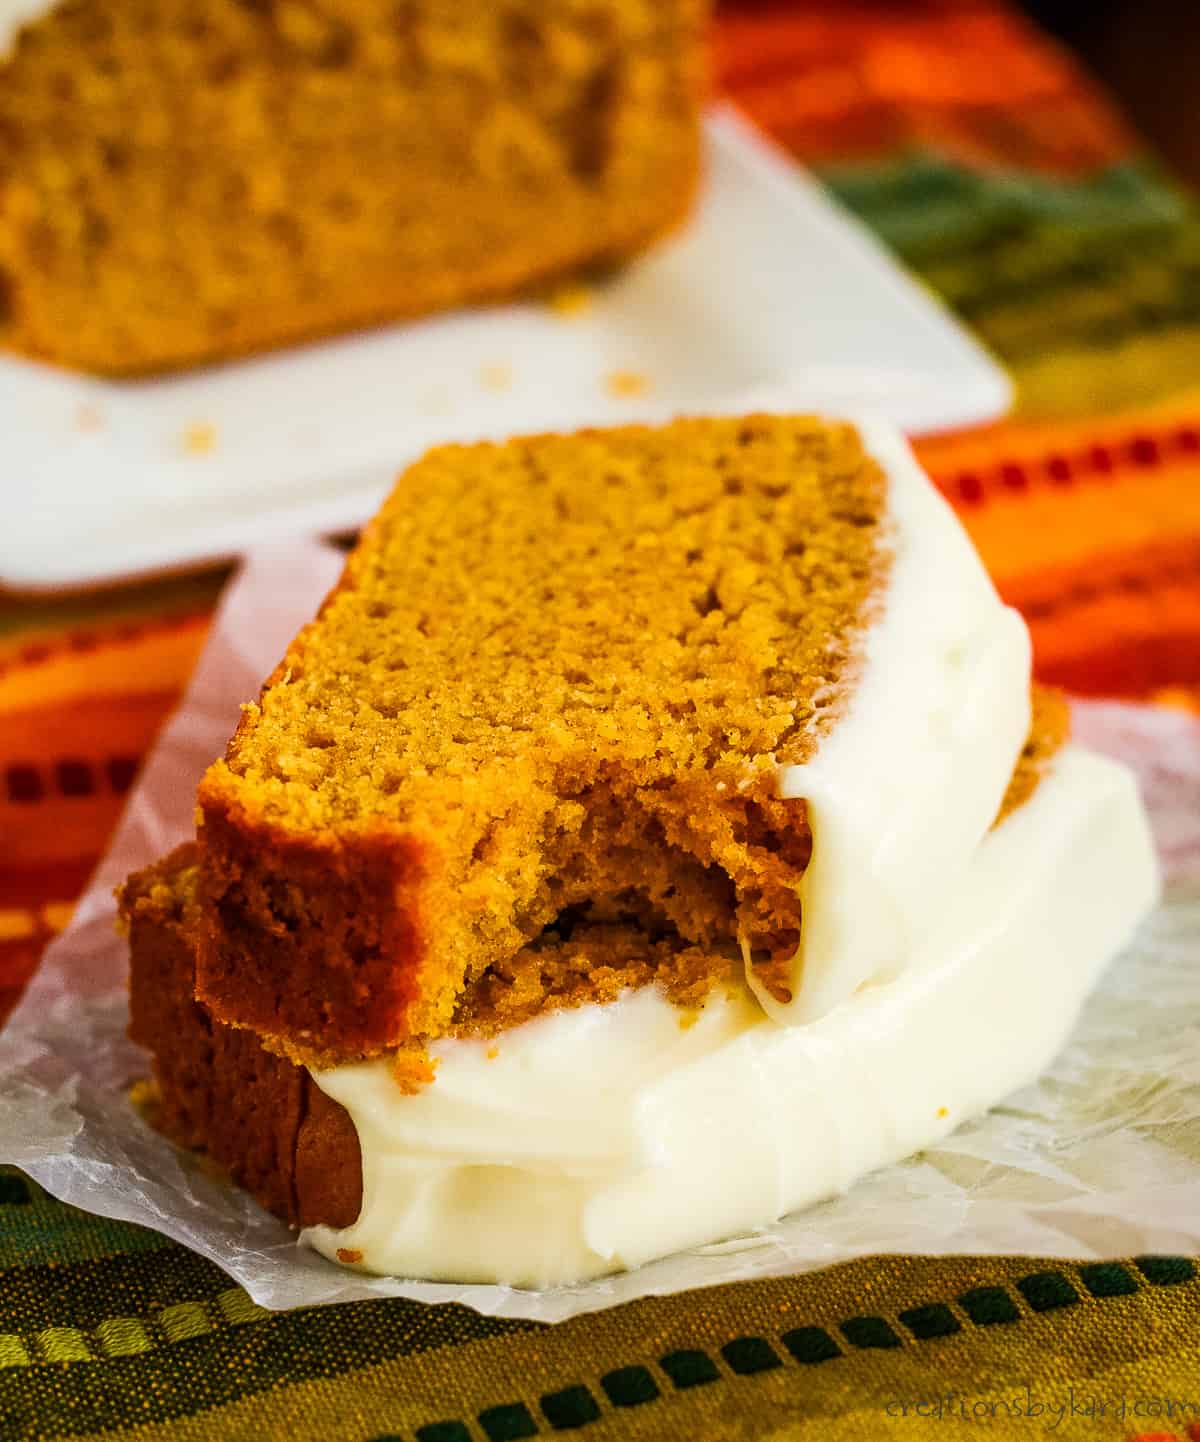 two slices of frosted pumpkin bread, one with a bite taken out of it